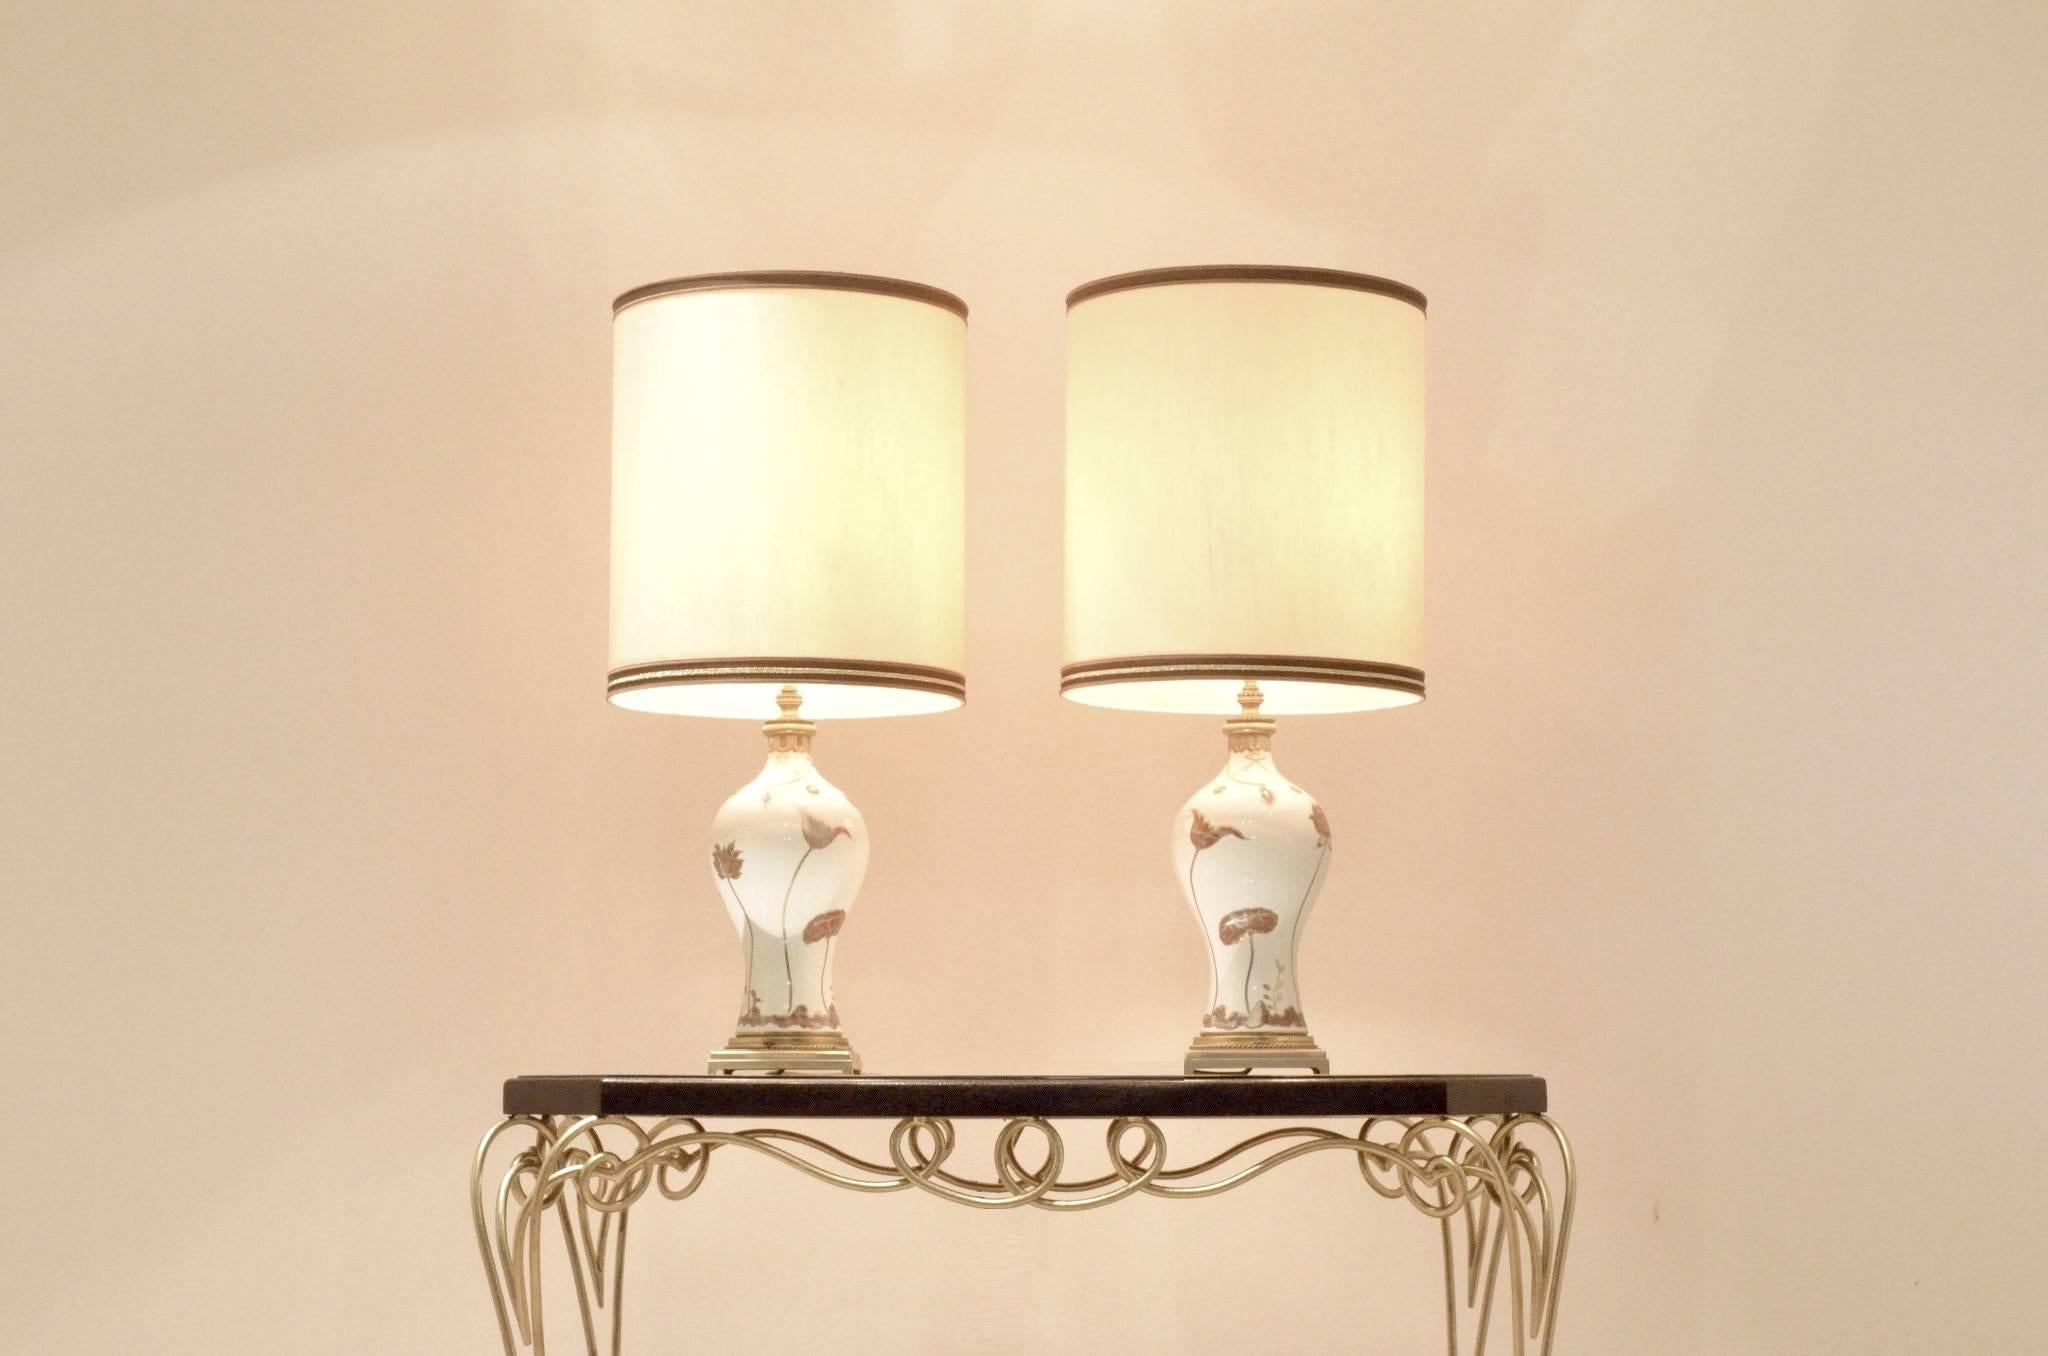 Extra large sized pair of midcentury table lamps manufactured by porcelain de Sèvres in the 1960s, hand painted white porcelain feet parts matched with gilt bronze elements.
Measures: ø 37 x 82 / H 92 cm.